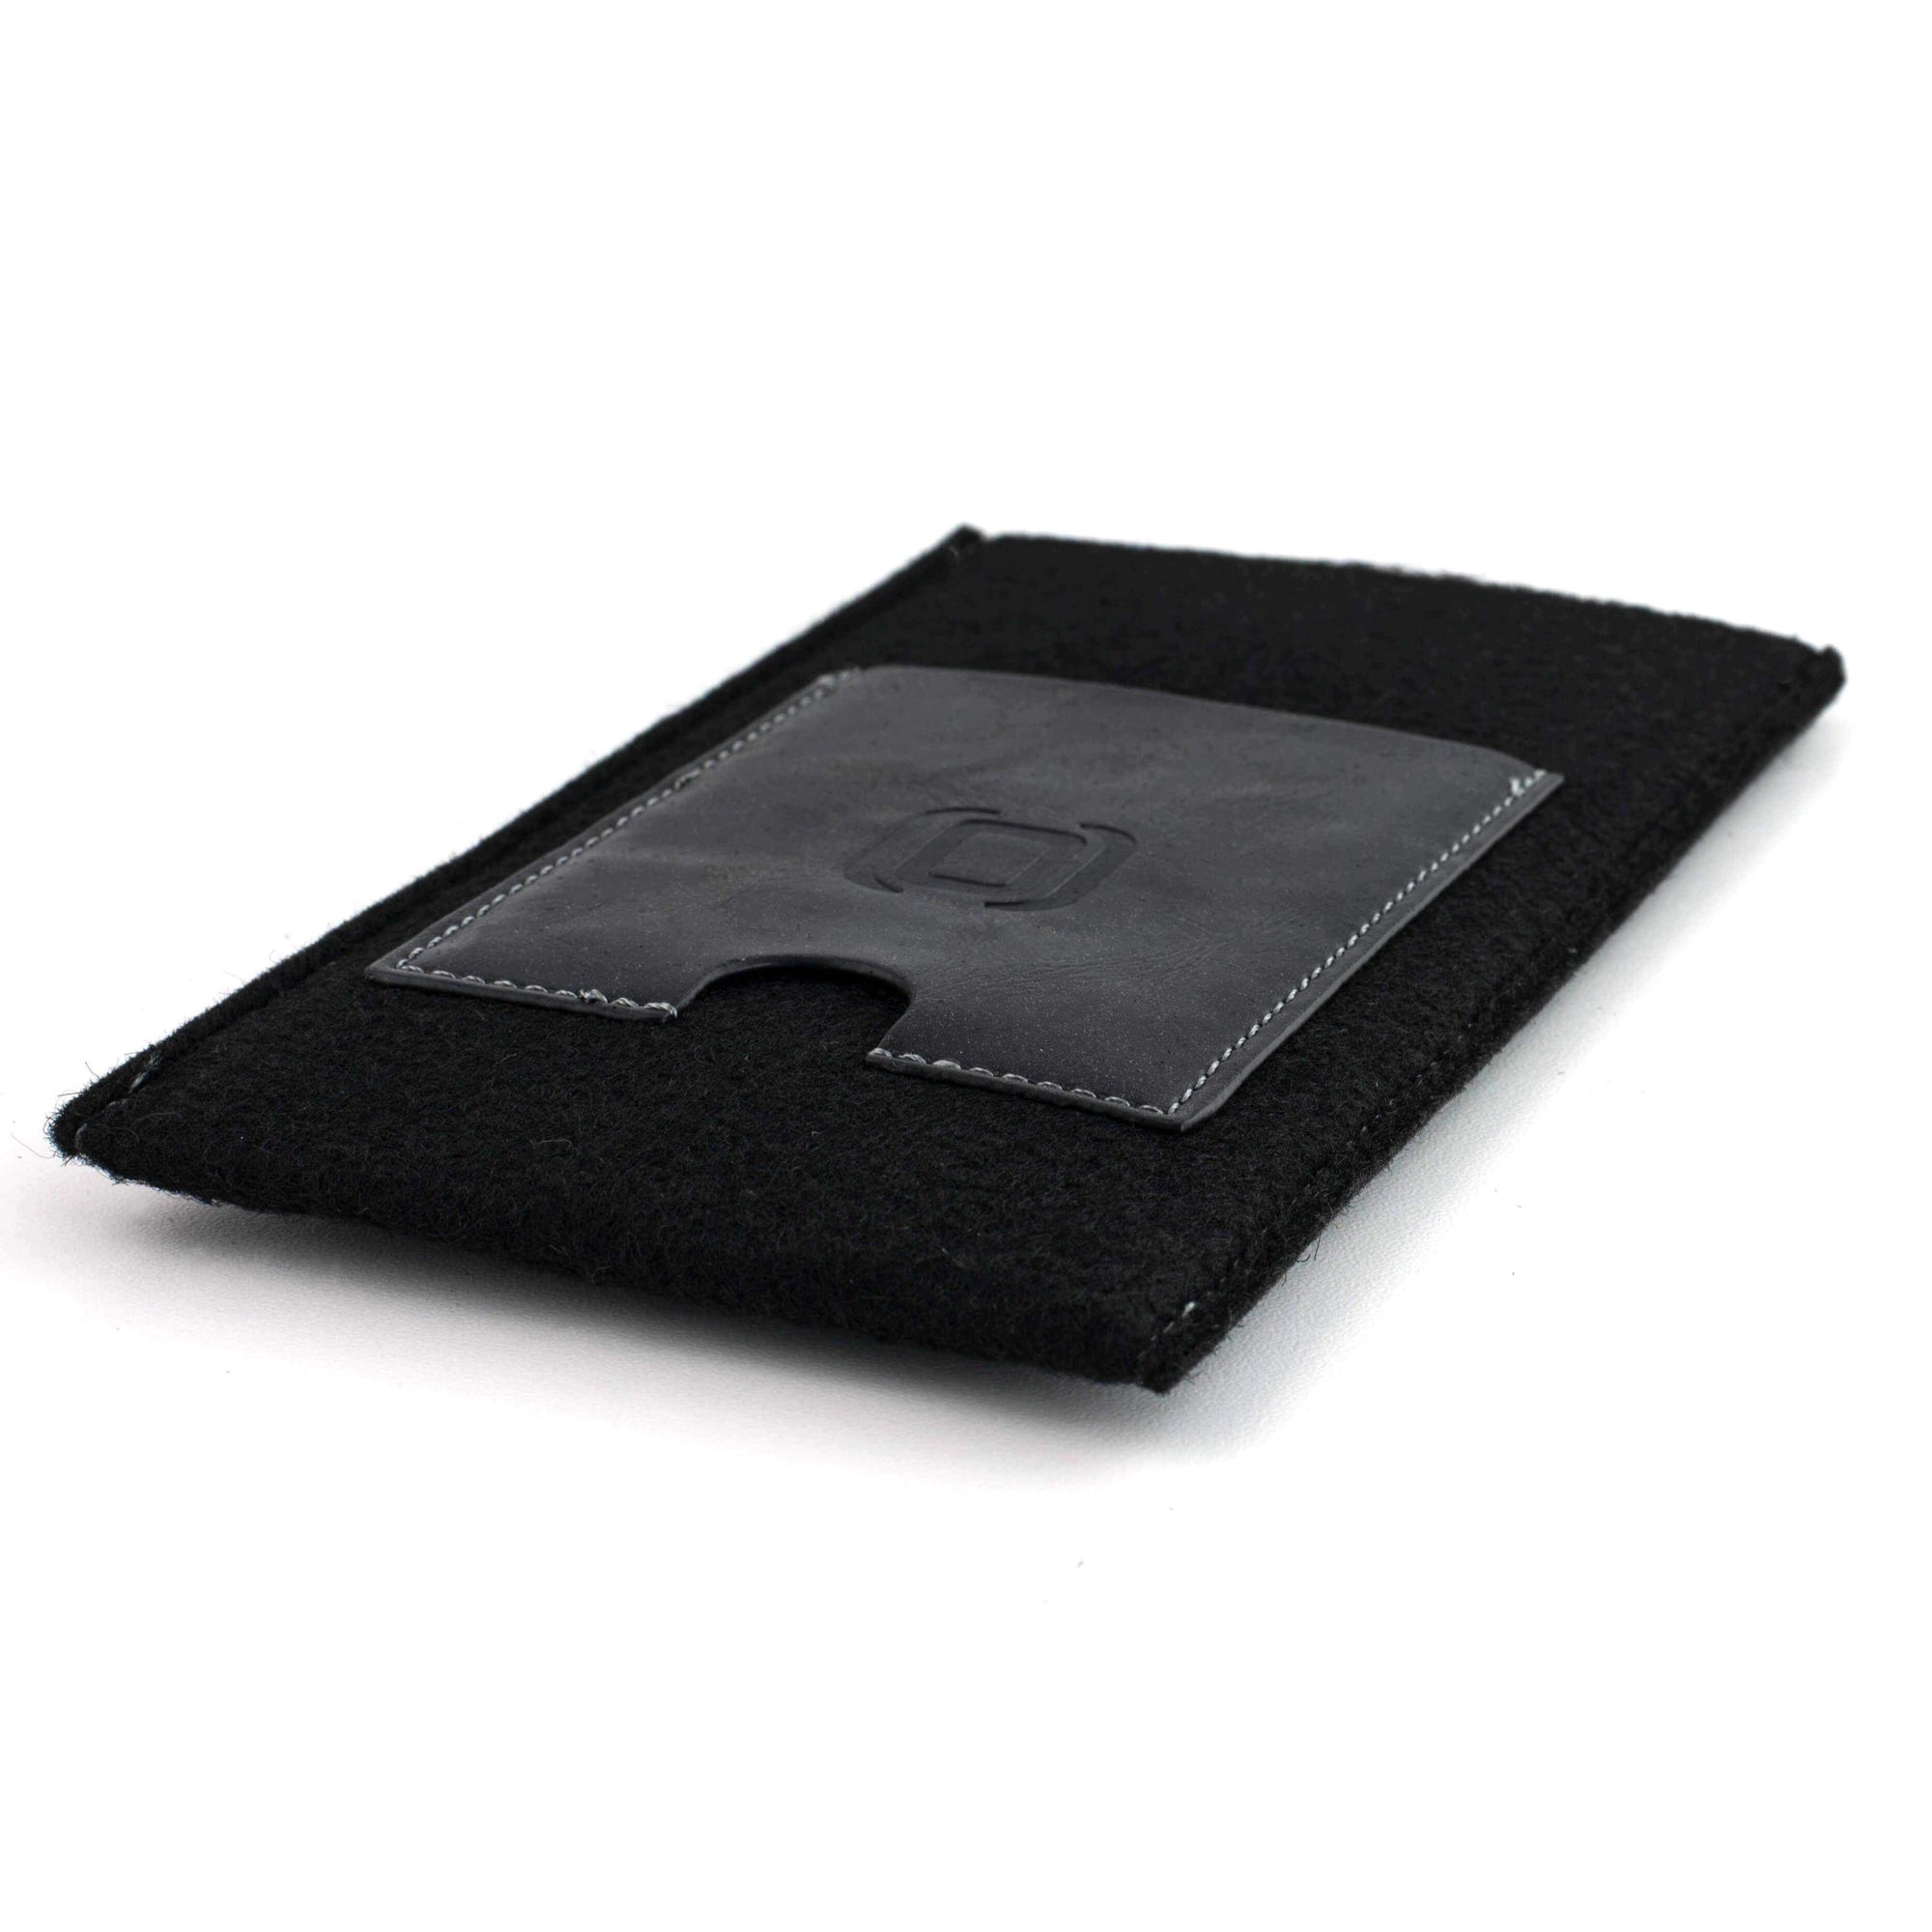 Felt Wallet Sleeve with 2 Synthetic Leather Card Pockets - iPhones iPhone Sleeve Dockem iPhone 11 Pro Max Black & Black 